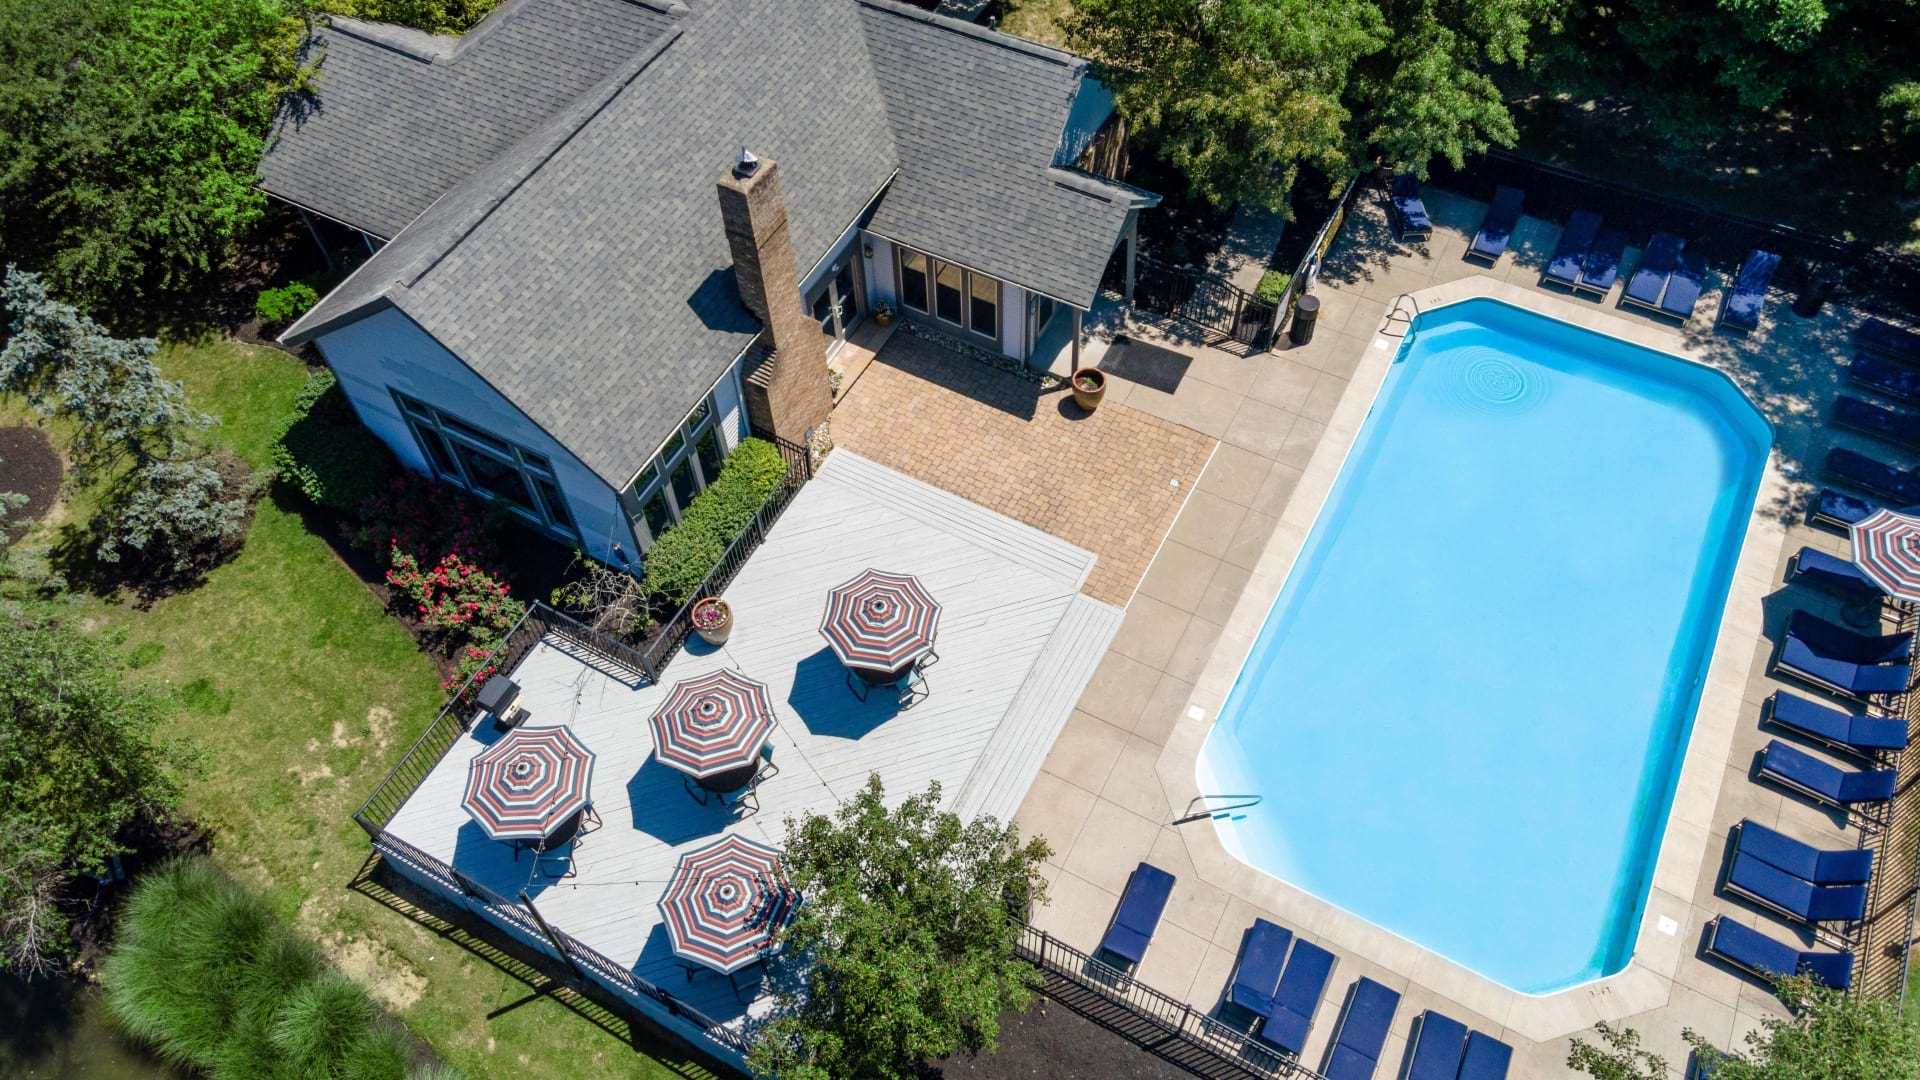 Resort-Style Pool at Our Reynoldsburg Apartments